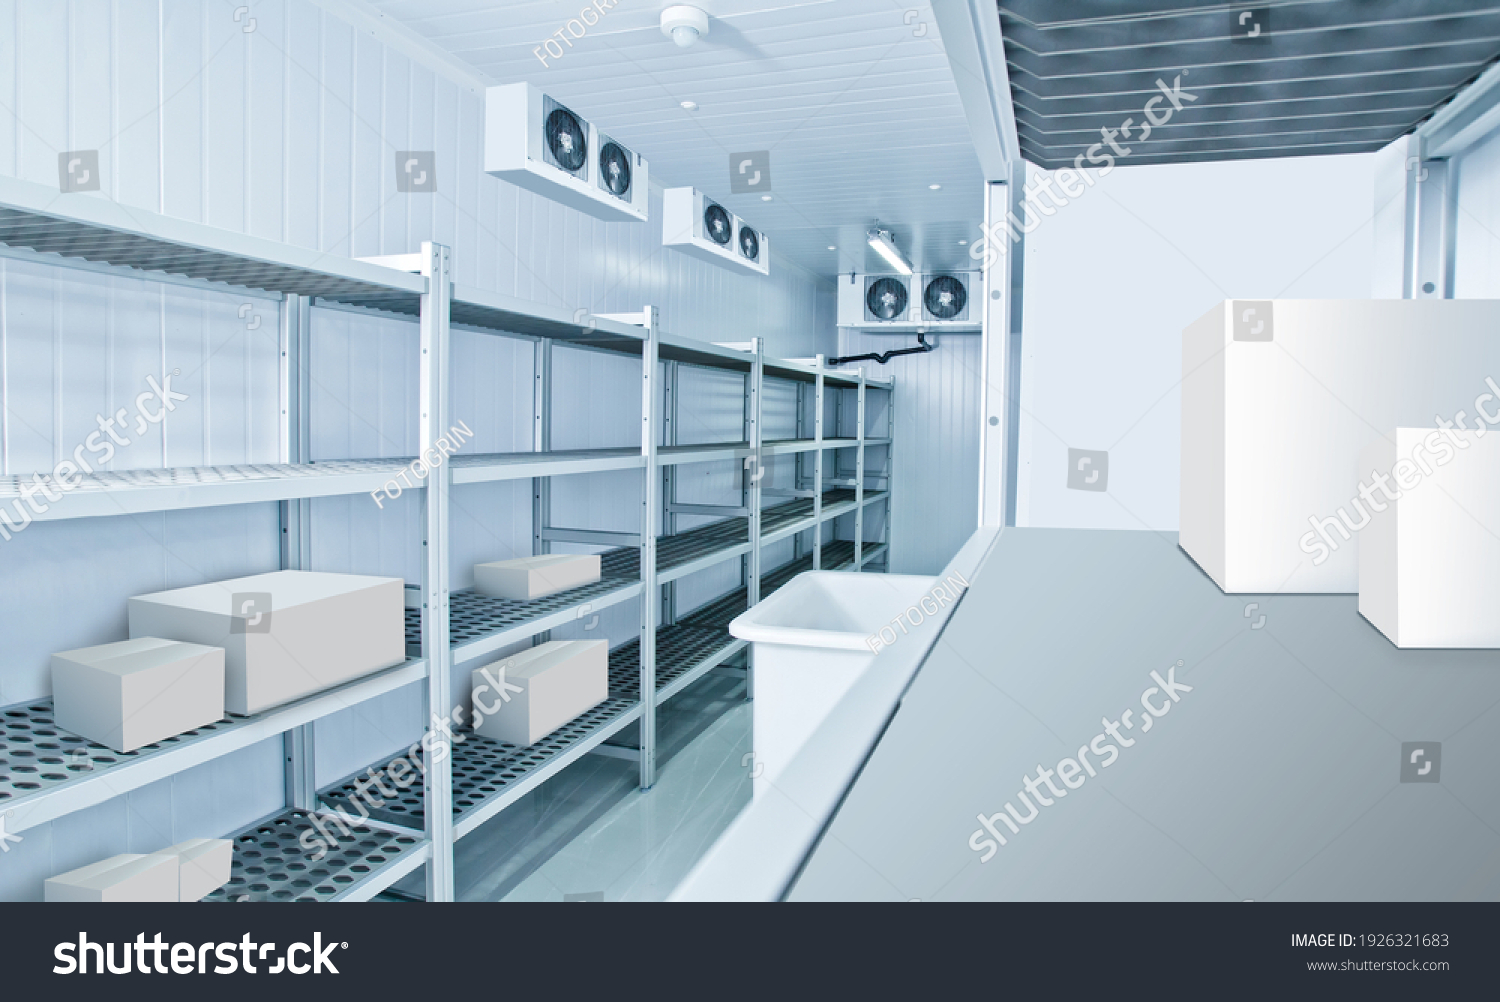 Refrigeration chamber for food storage. Industrial refrigeration chamber with empty shelves. Luggage storage in the restaurant. Concept - sale of refrigeration equipment. Equipment for restaurants #1926321683